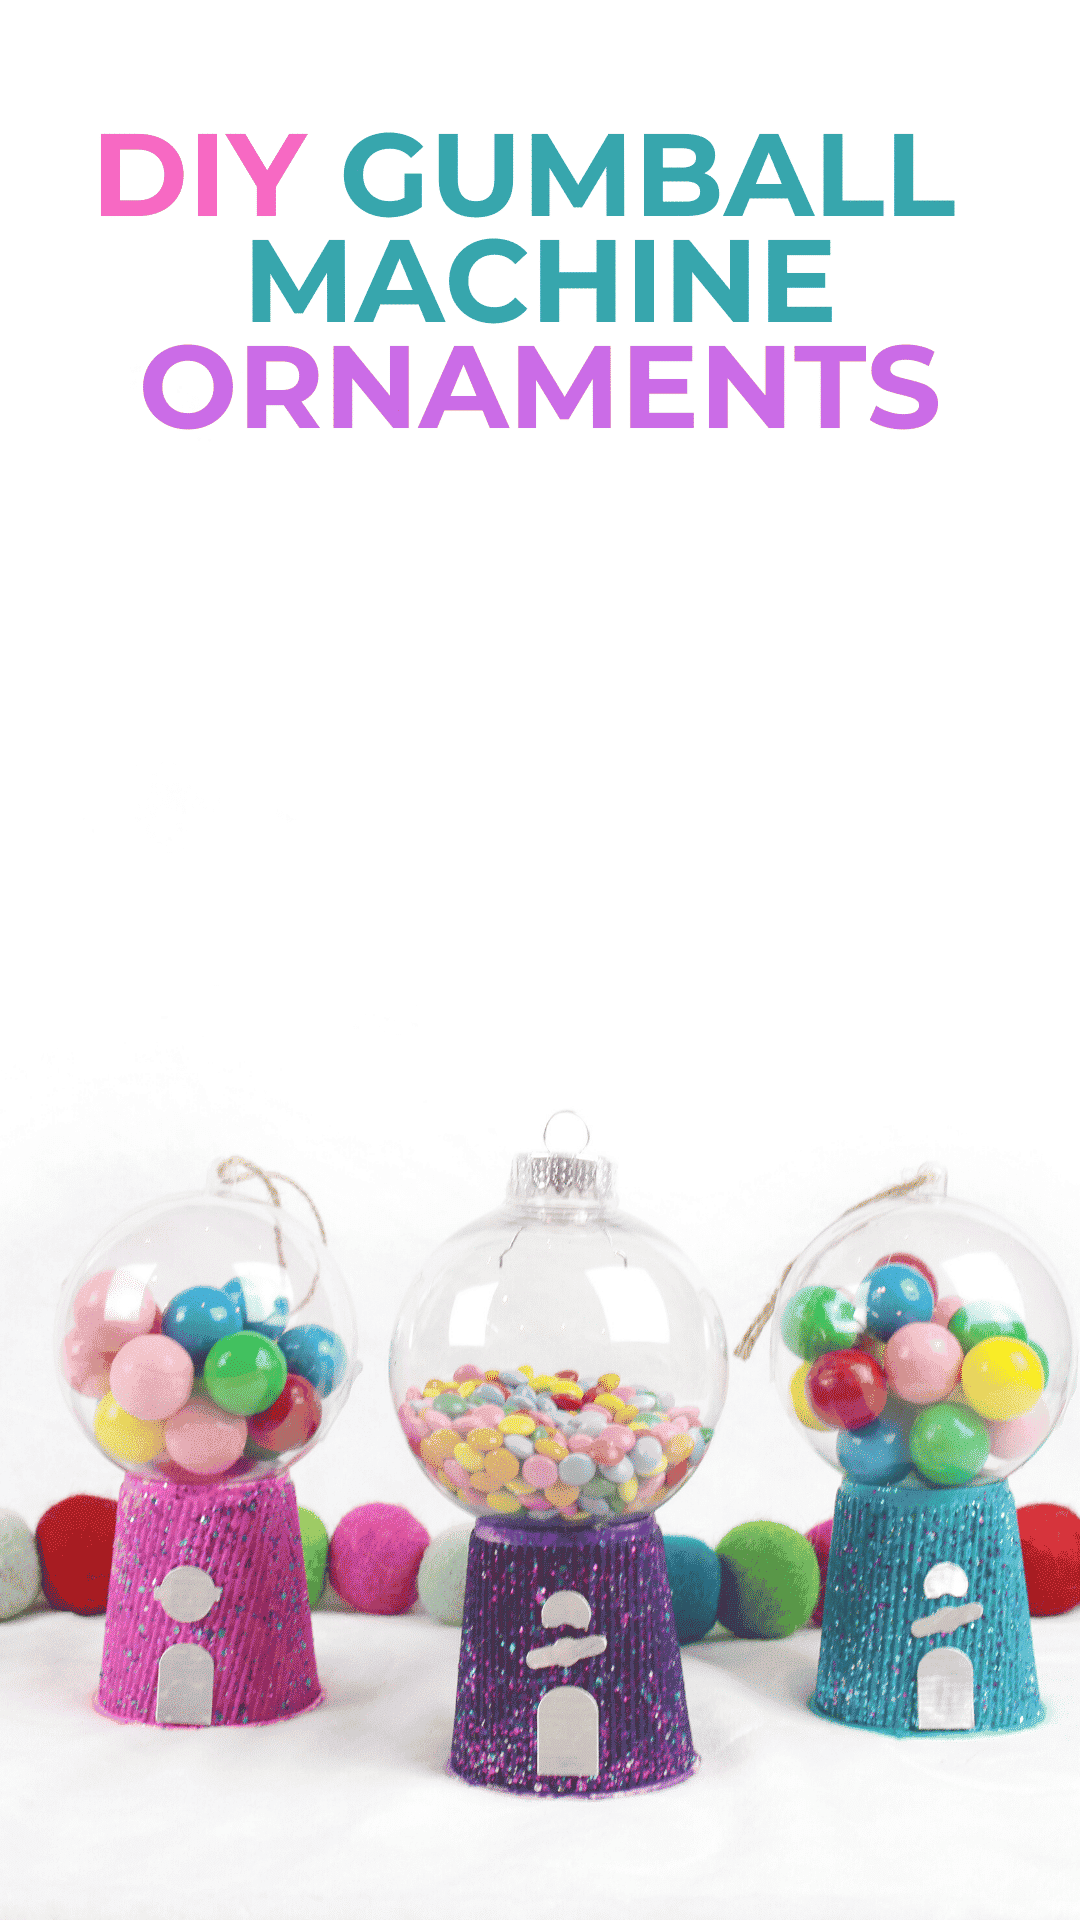 East kids craft - make this bright and colorful DIY Gumball Machine Ornament. Easy to make, kids will love seeing this on their Christmas Tree. via @brookeberry